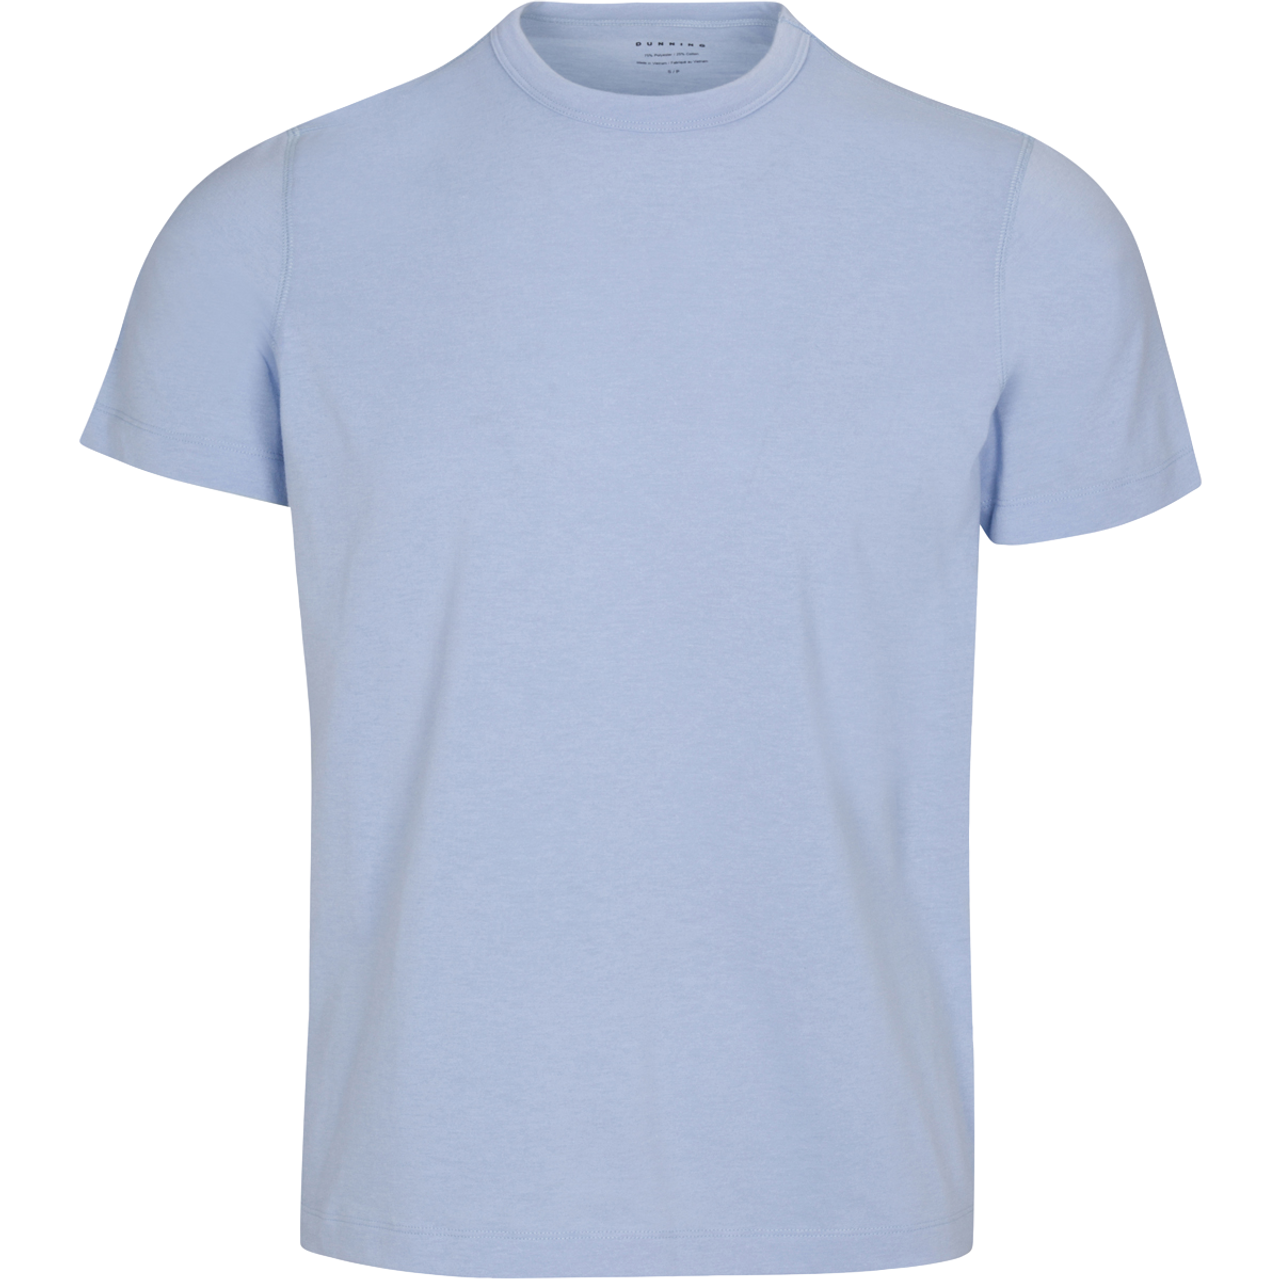 Witham Performance T-Shirt - Dunning